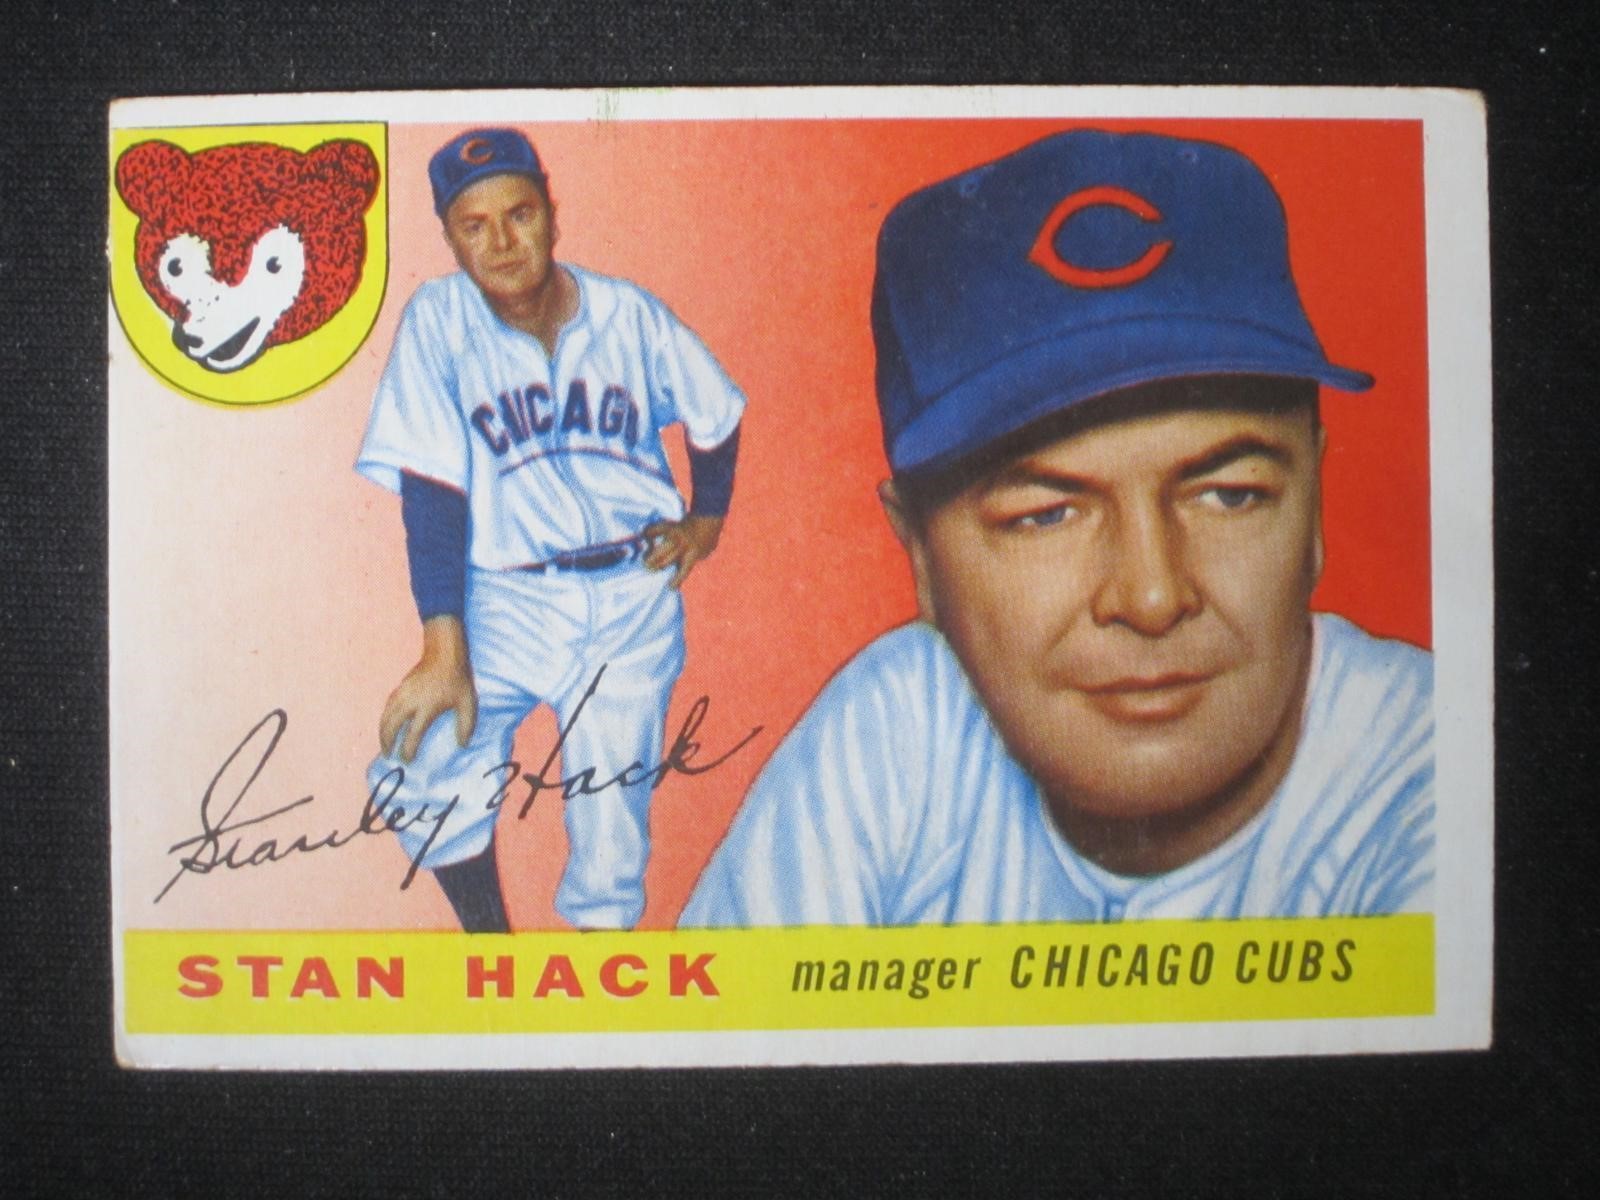 1955 TOPPS #6 STAN HACK CUBS MANAGER